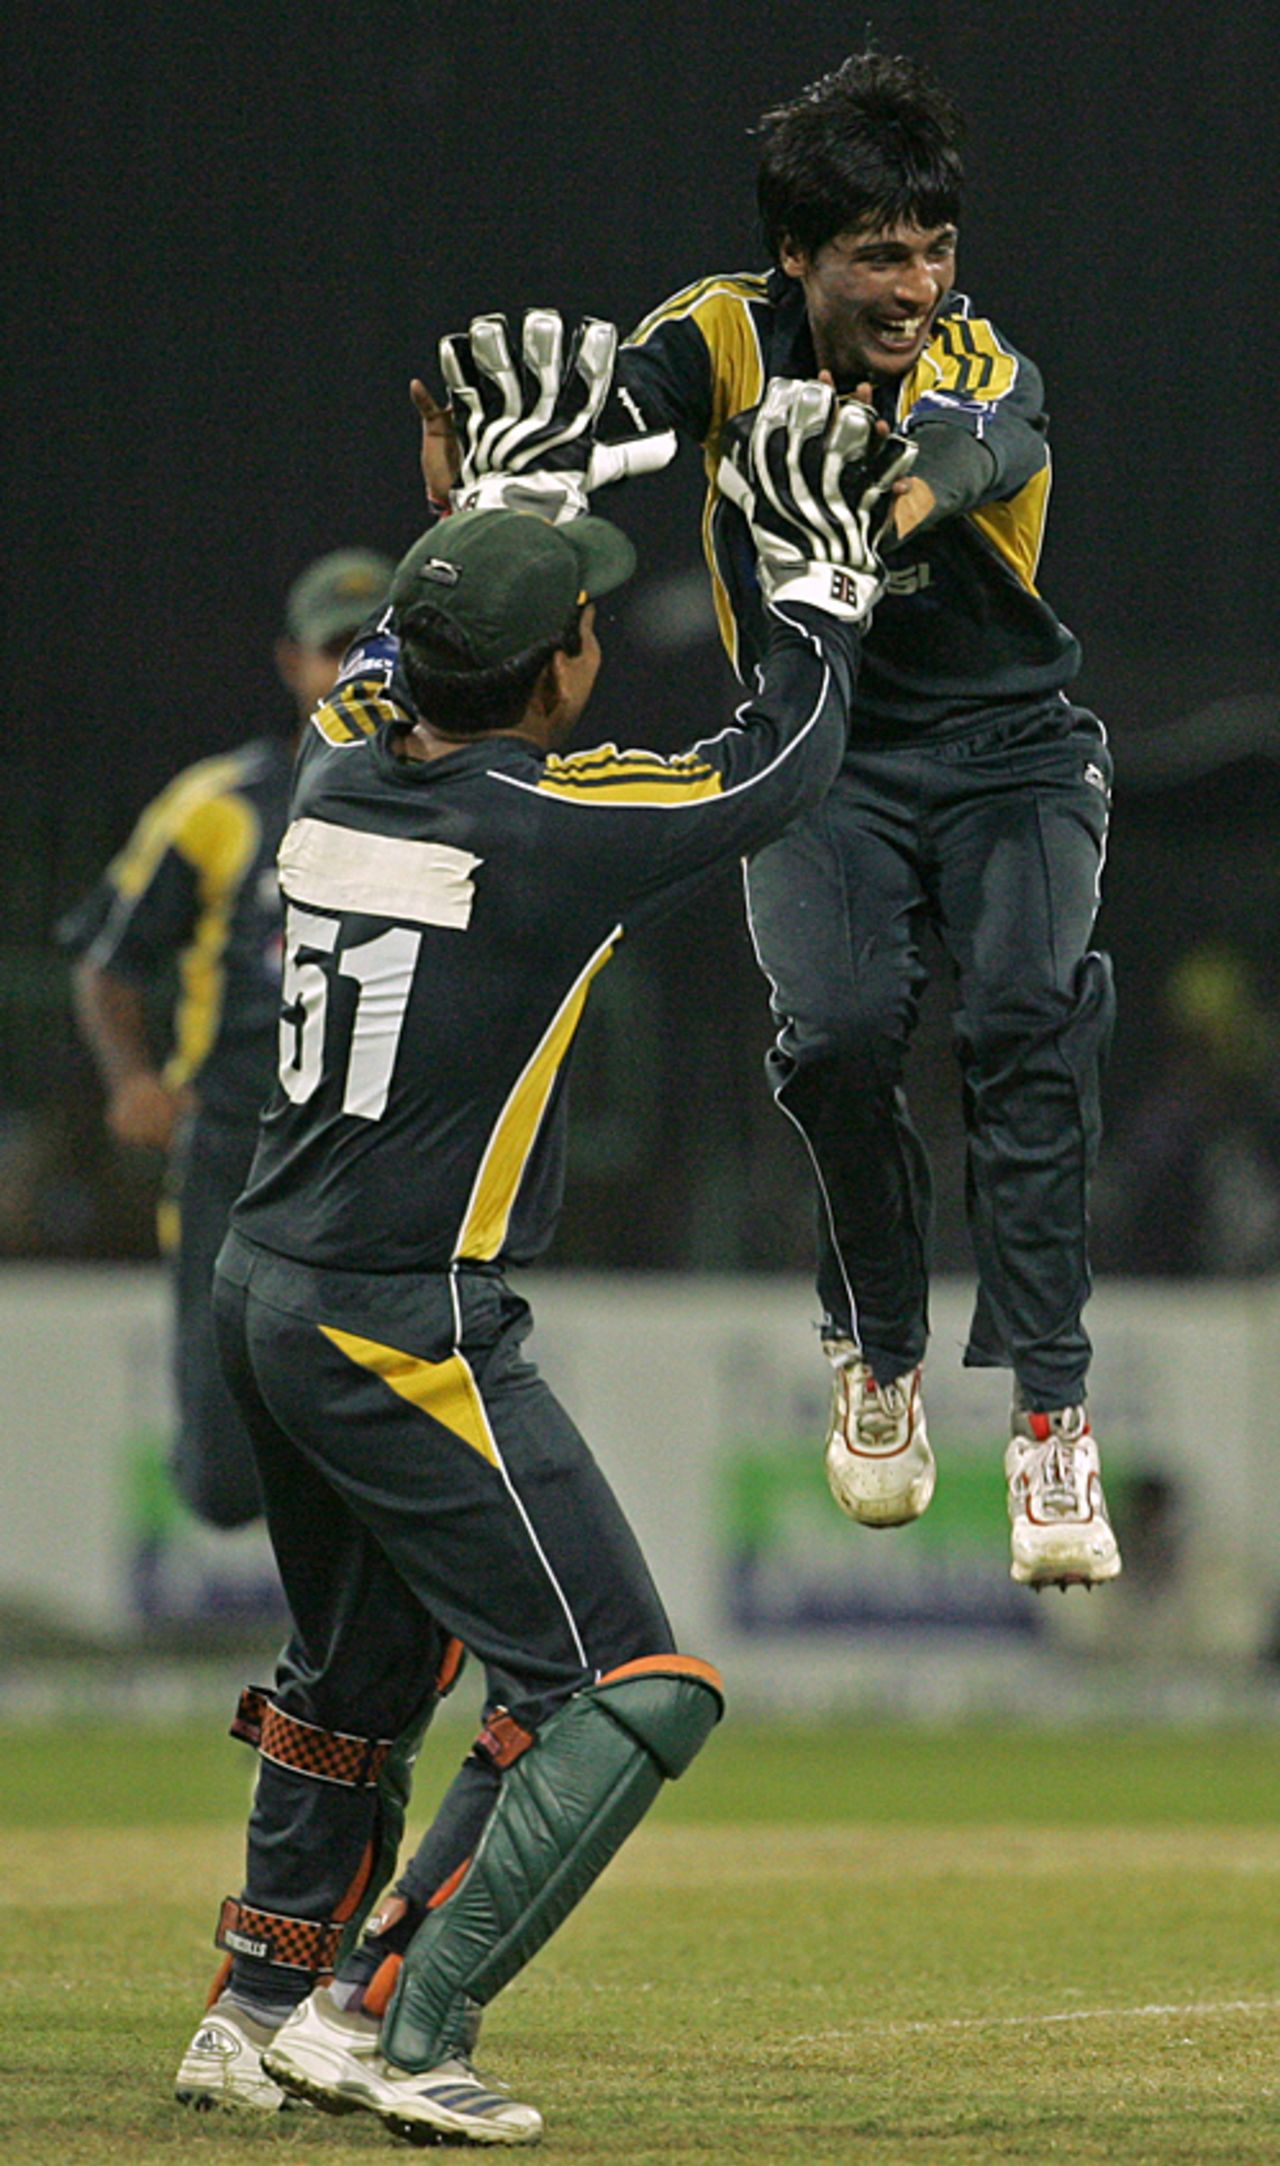 Mohammad Aamer is on a high after dismissing Angelo Mathews, Sri Lanka v Pakistan, 5th ODI, Colombo, August 9, 2009